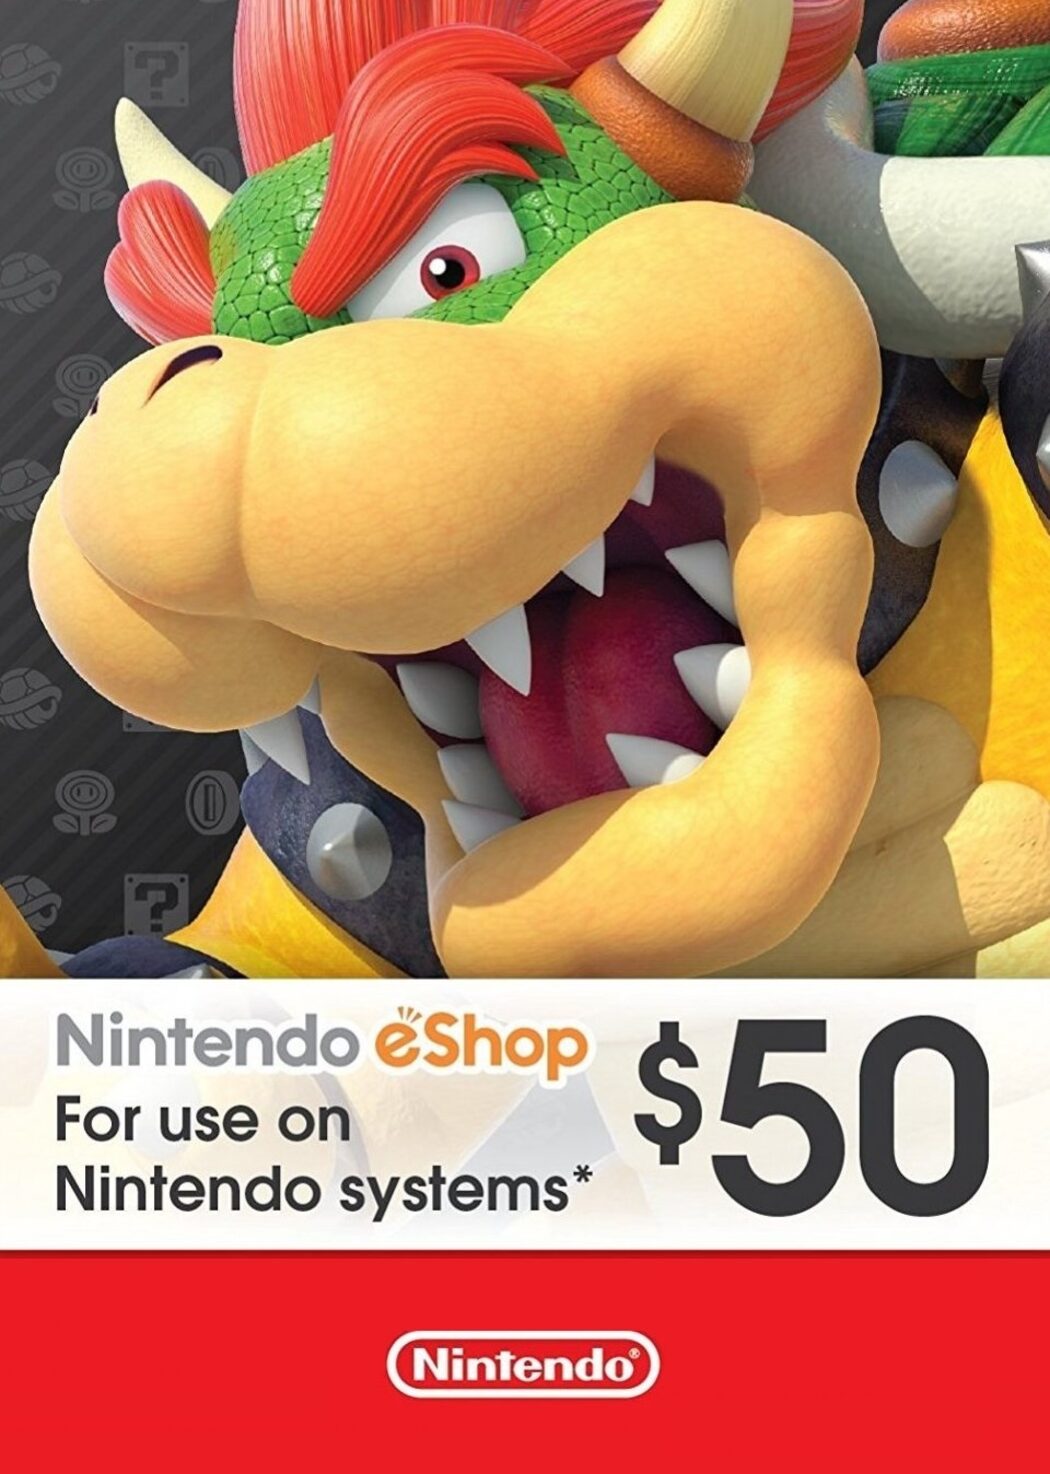 Buy Nintendo eShop Cards, Cheap Switch Gift Cards